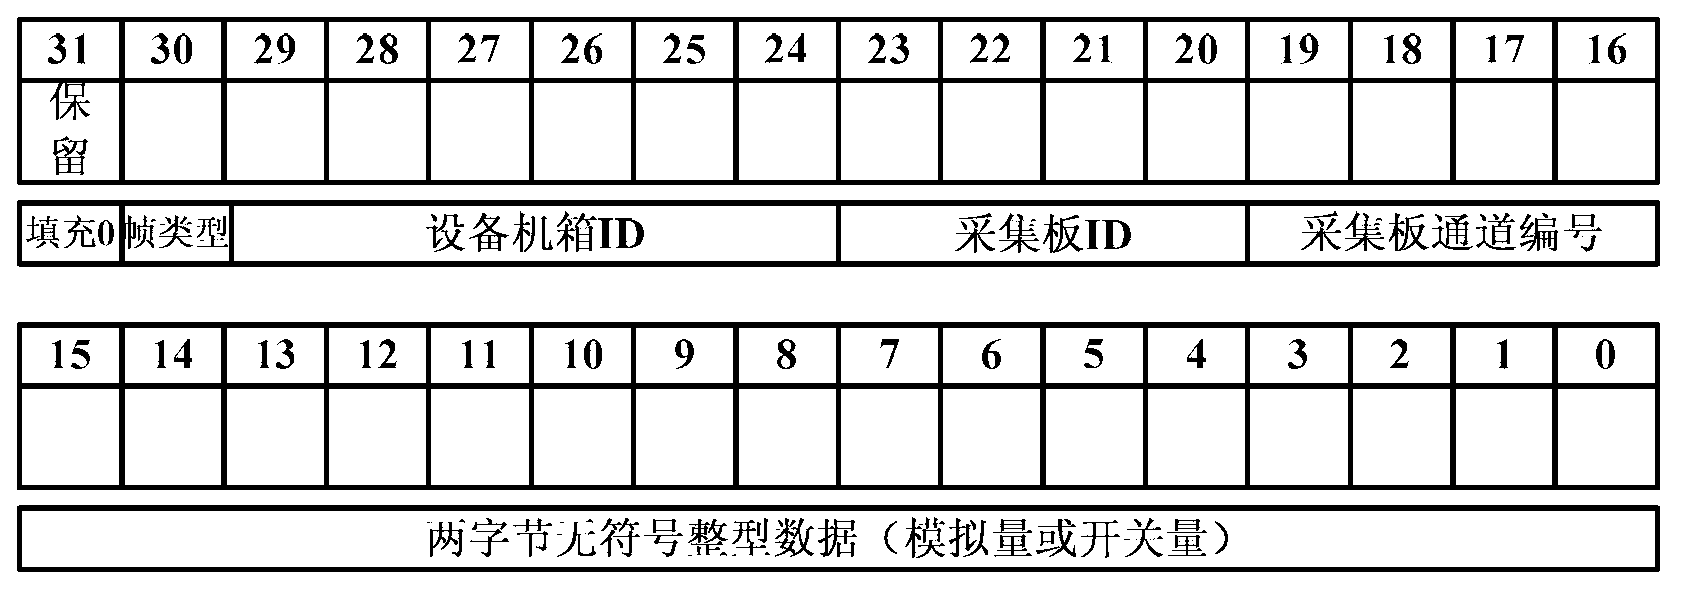 Assembling method for controller area network (CAN) data frames applied in ship dynamic information acquisition device